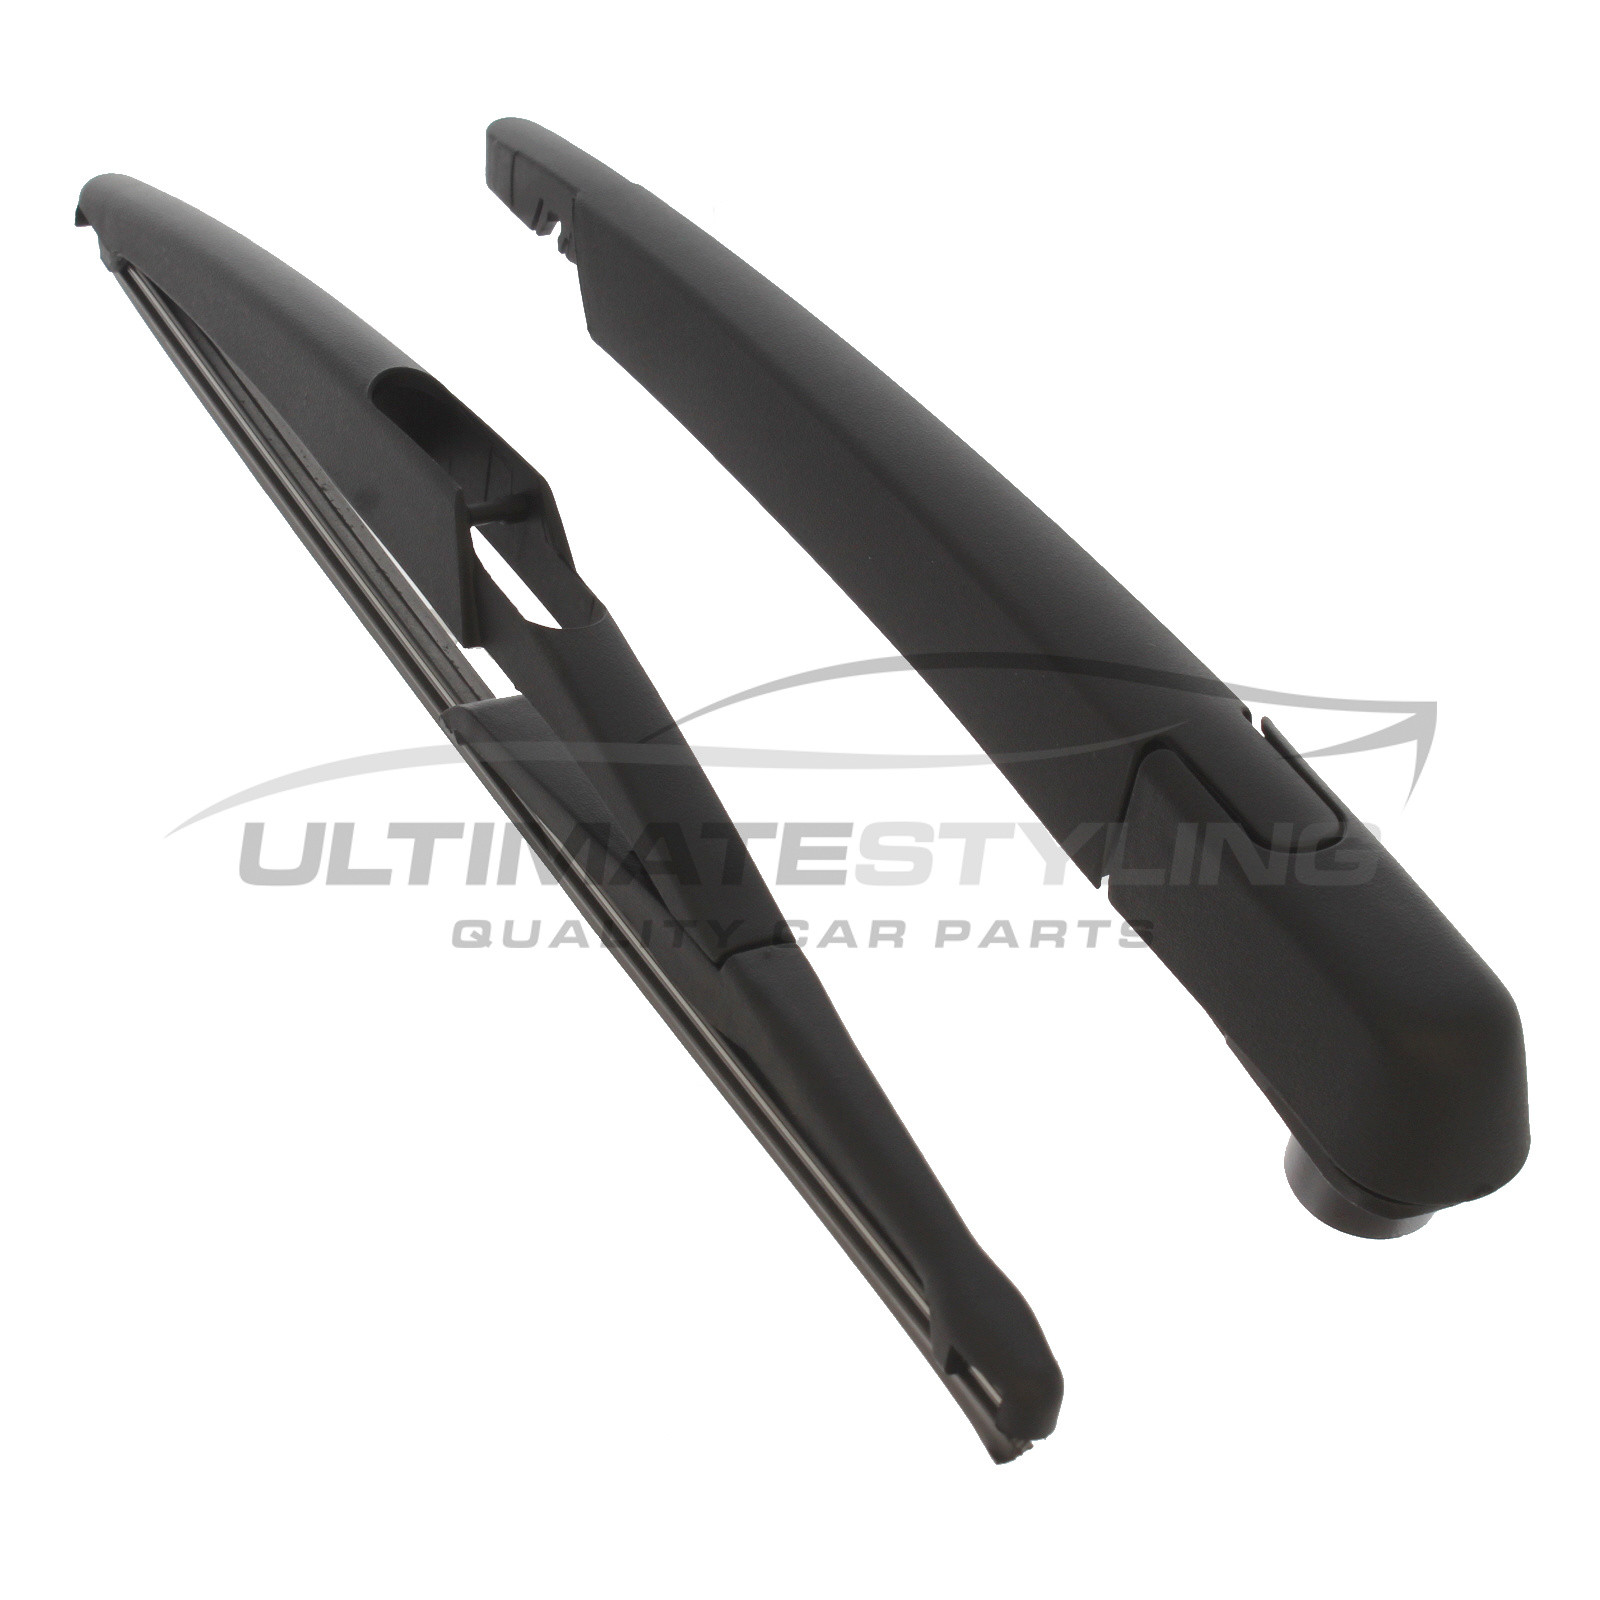 Rear Wiper Arm & Blade Set for Renault Zoe